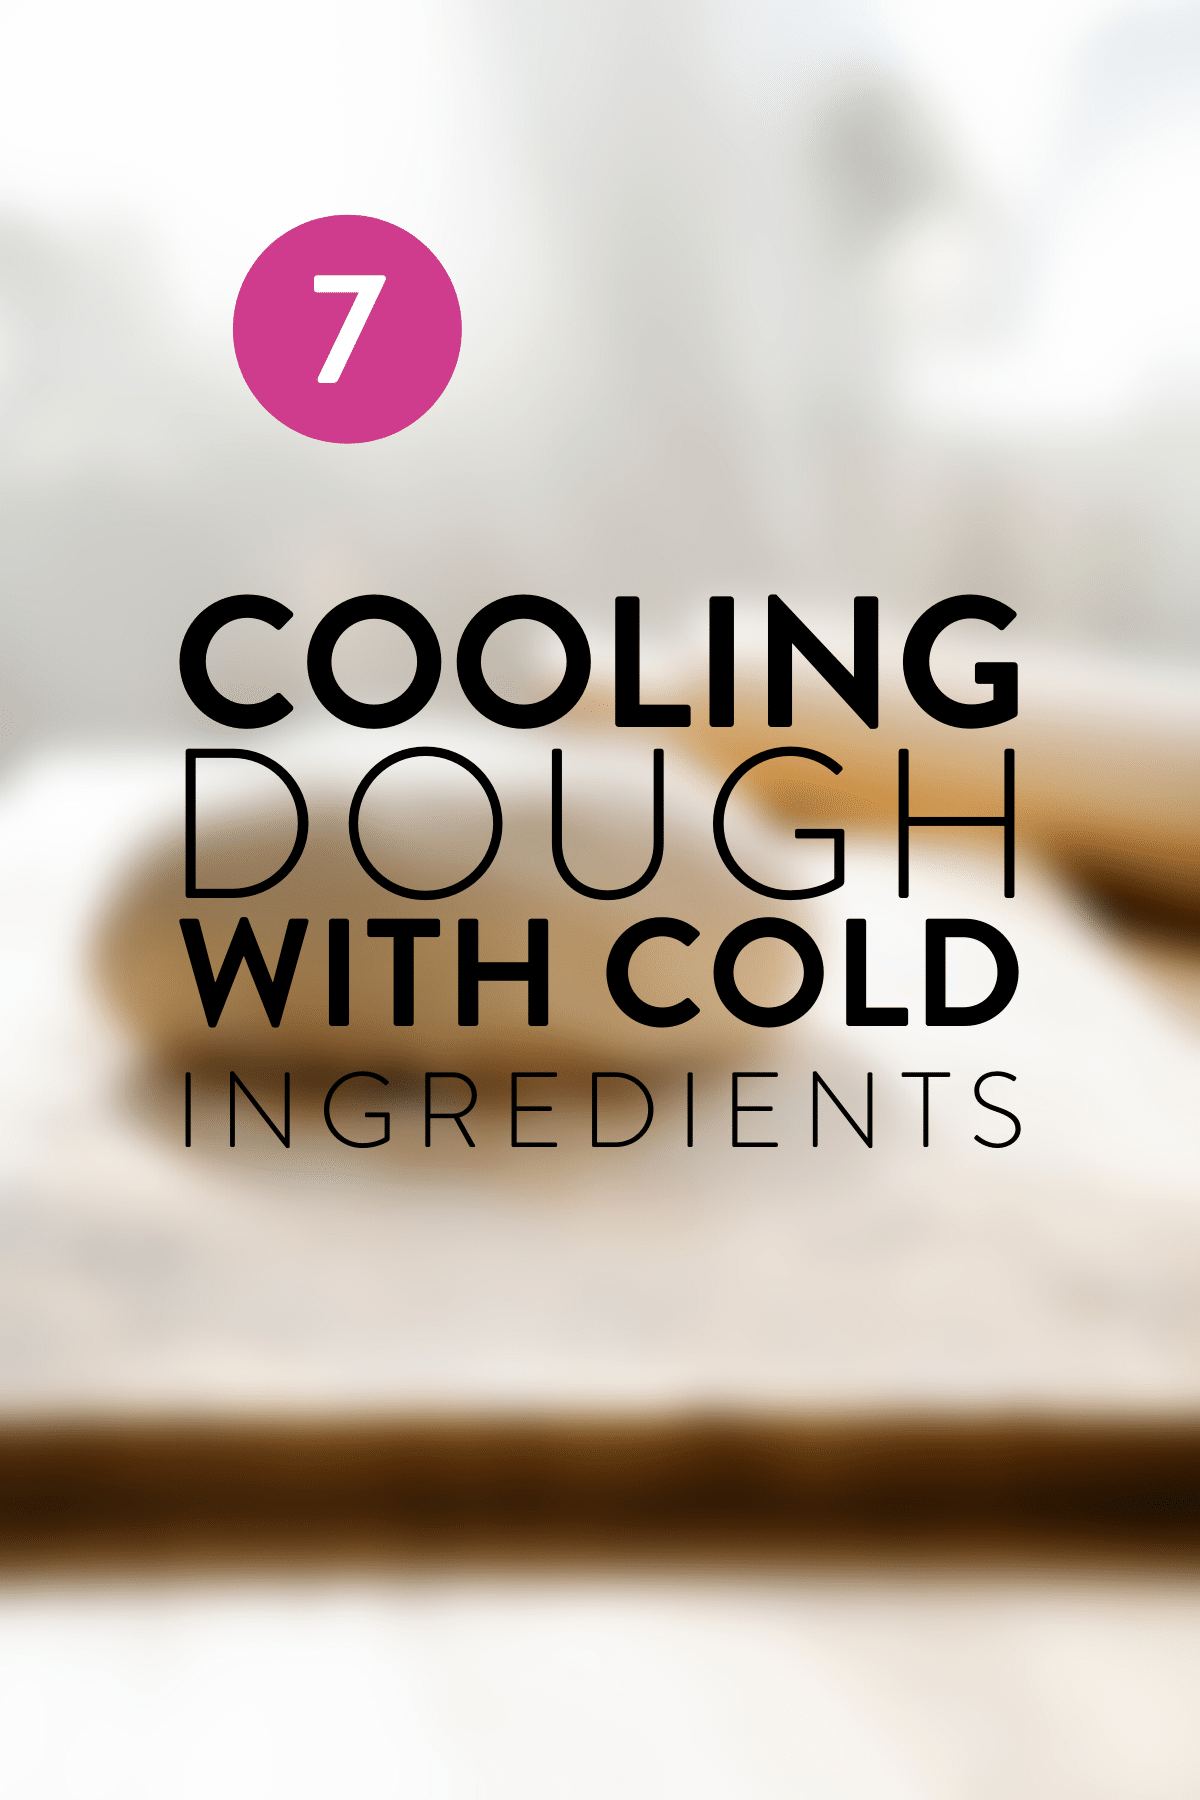 Mistake 7 - Cooling Dough with Cold Ingredients